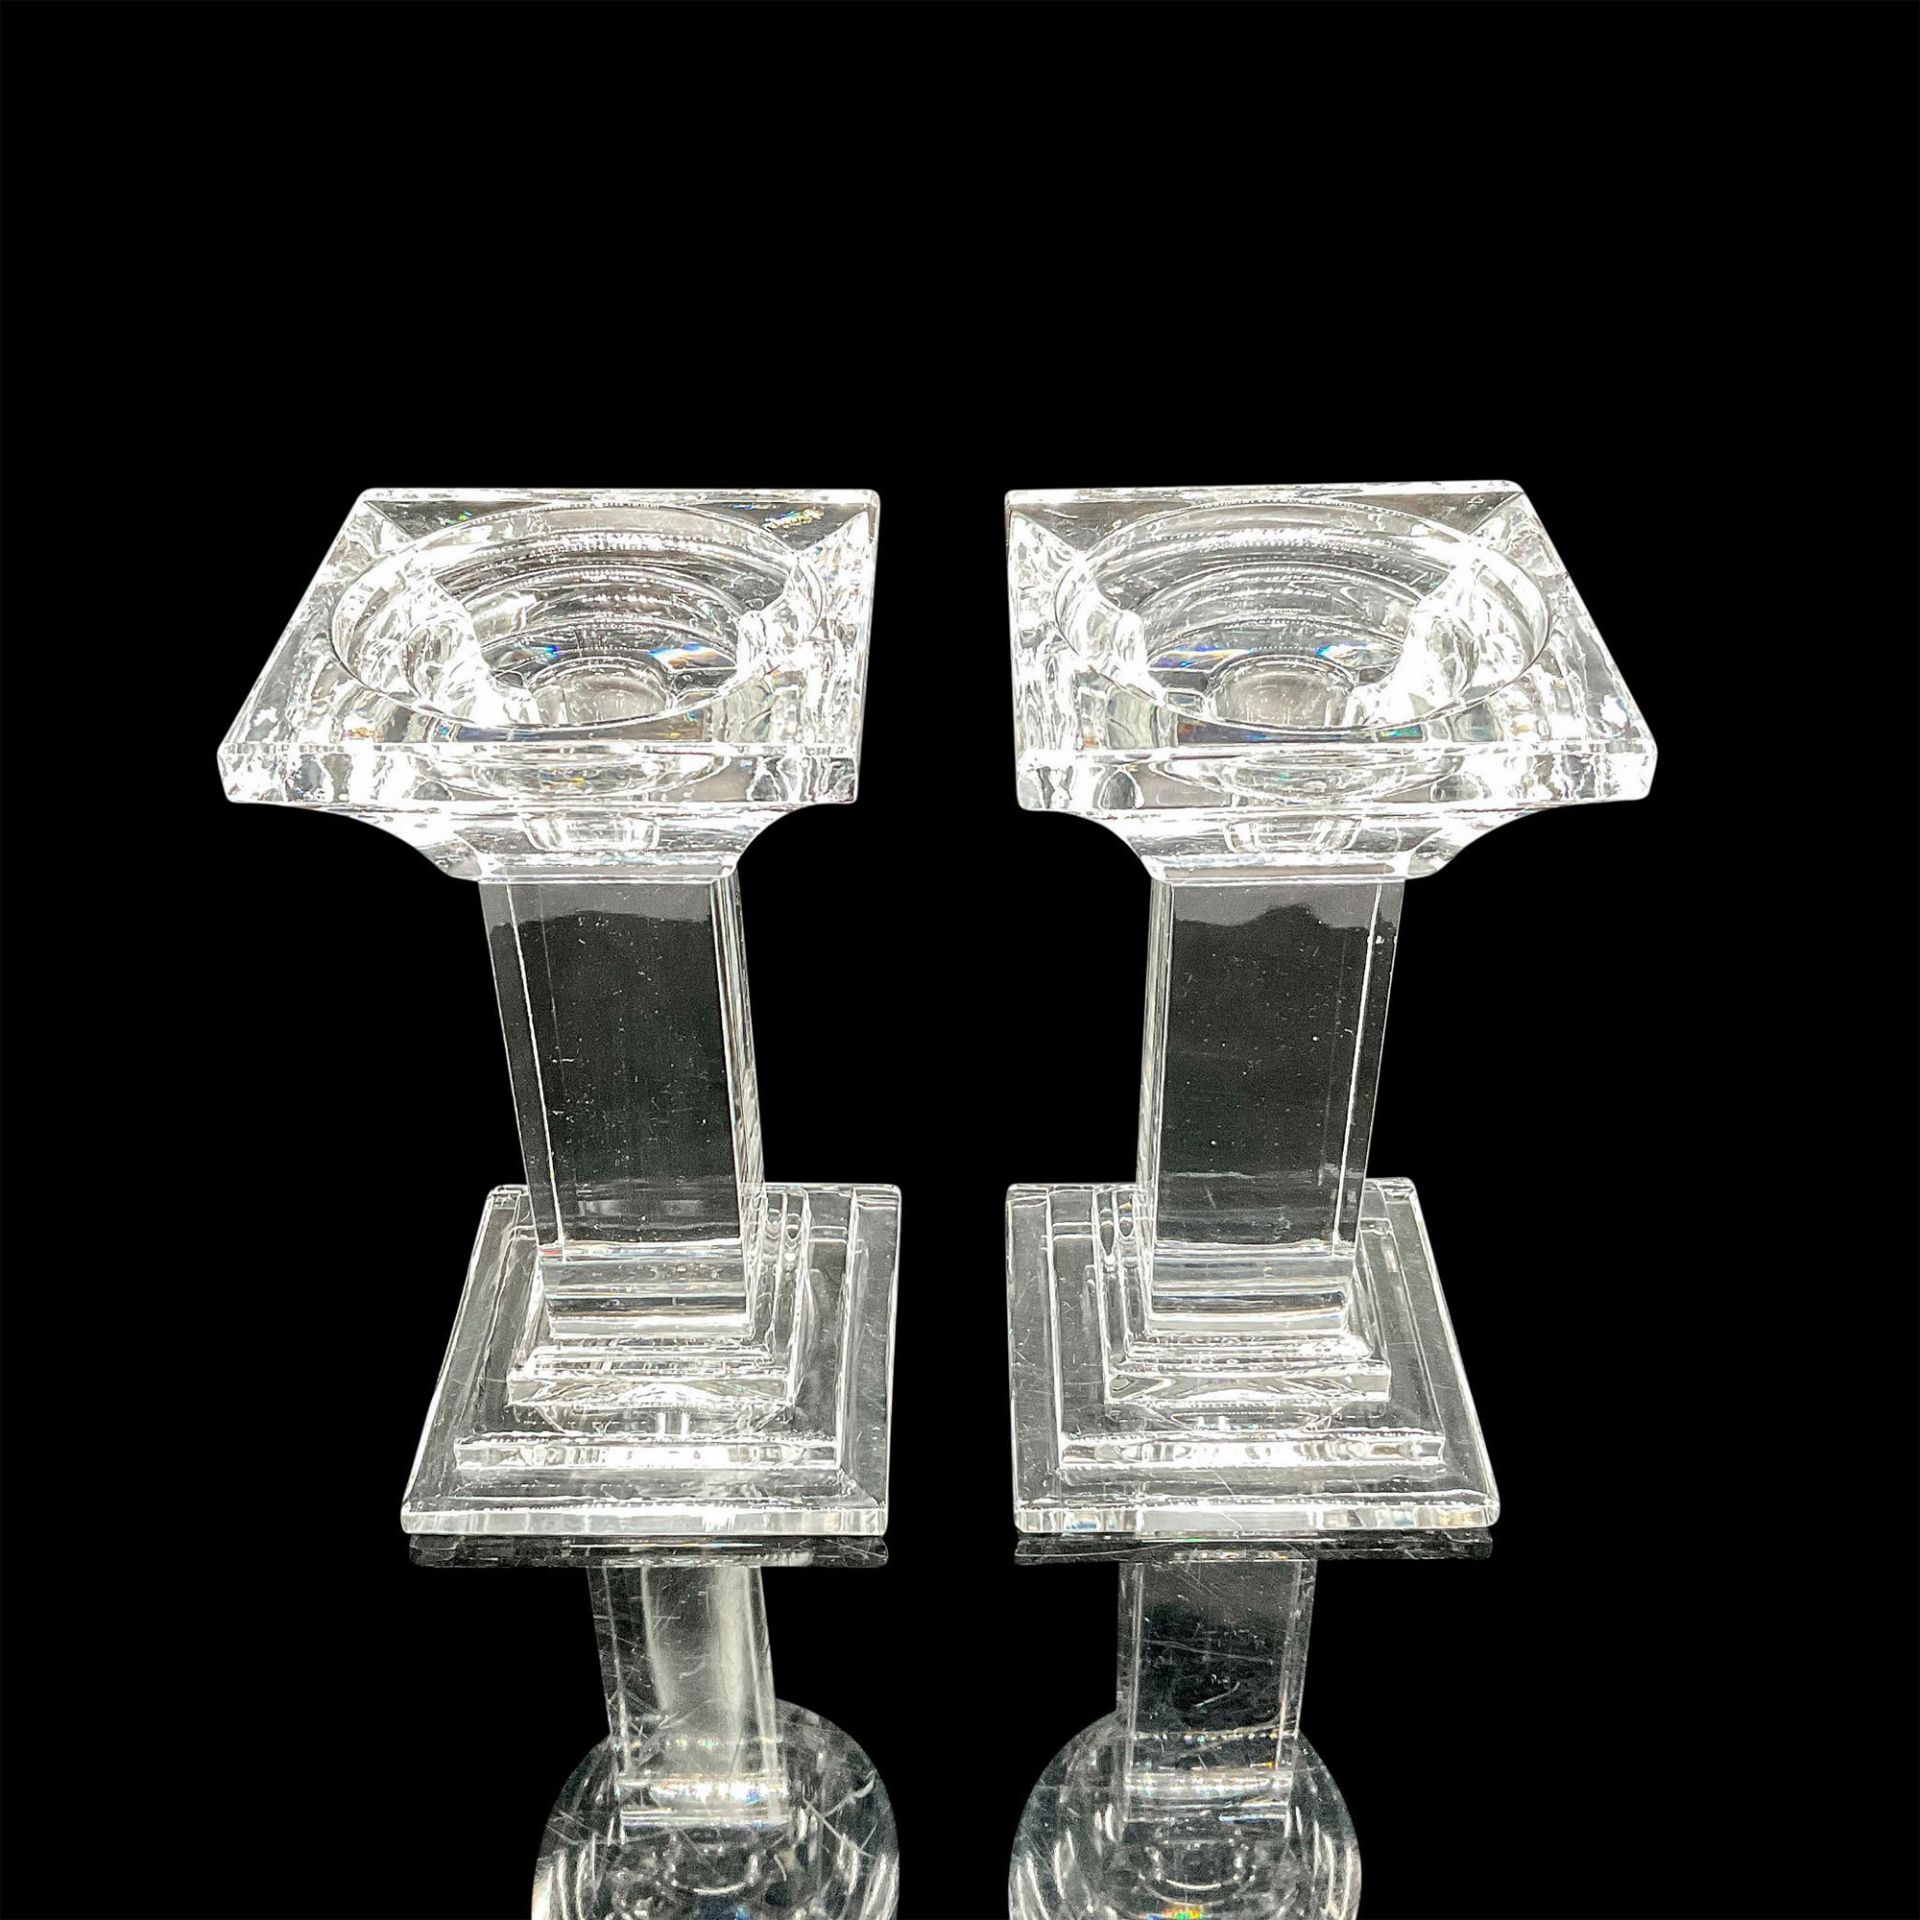 2pc Shannon Crystal 7-Inch-Tall Pillar Candle Holders - Image 2 of 3